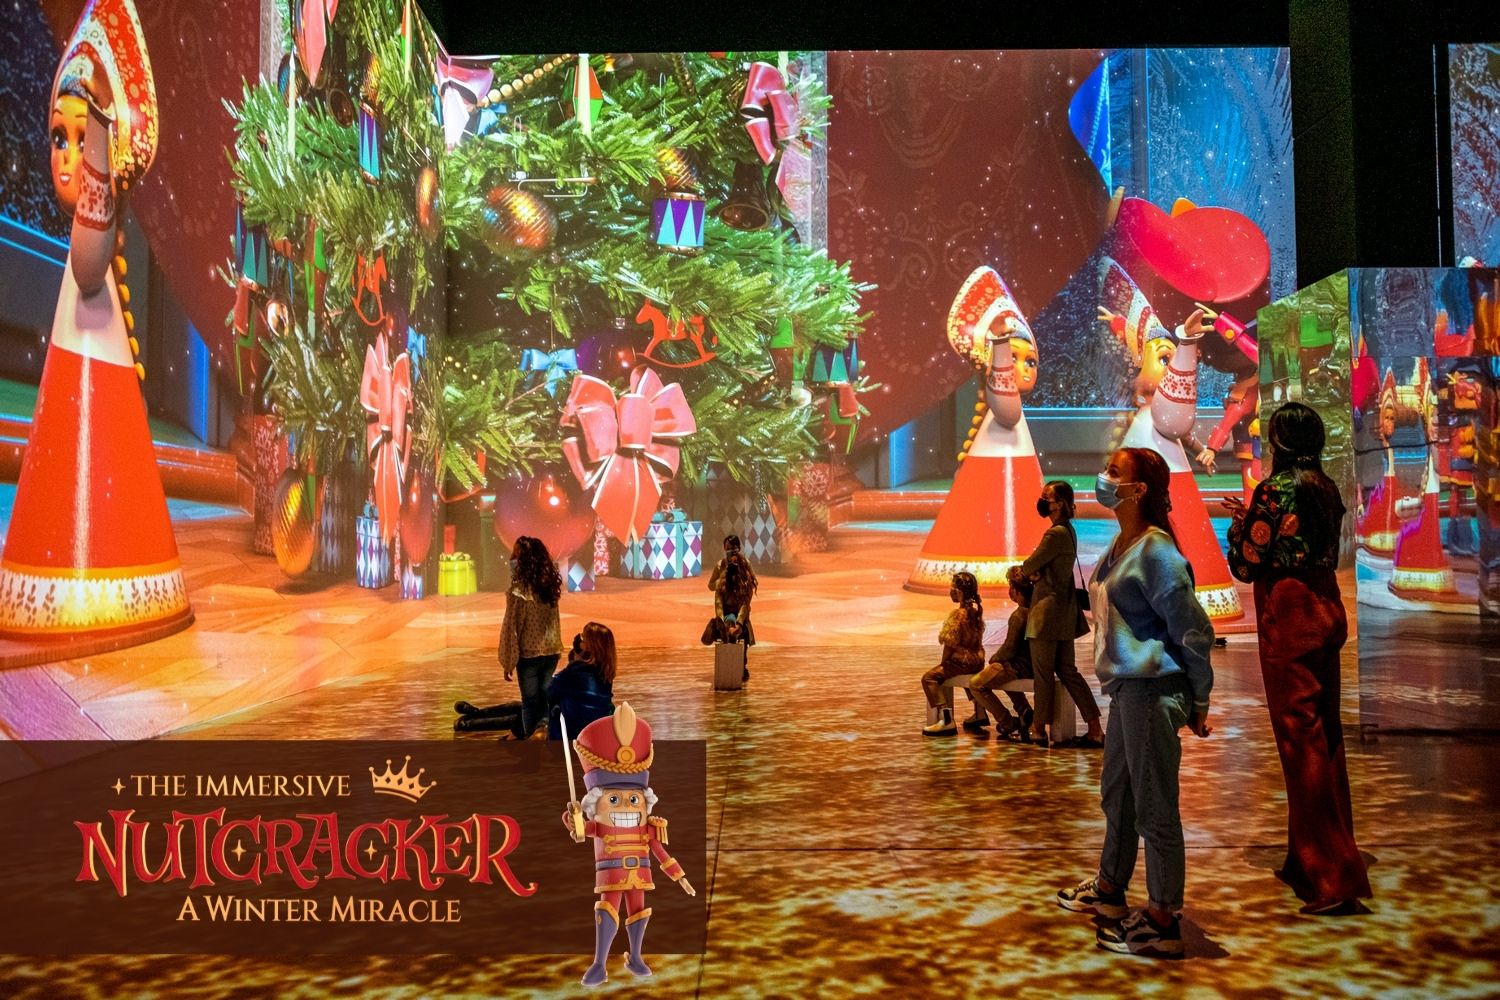 The Immersive Nutcracker, A Winter Miracle